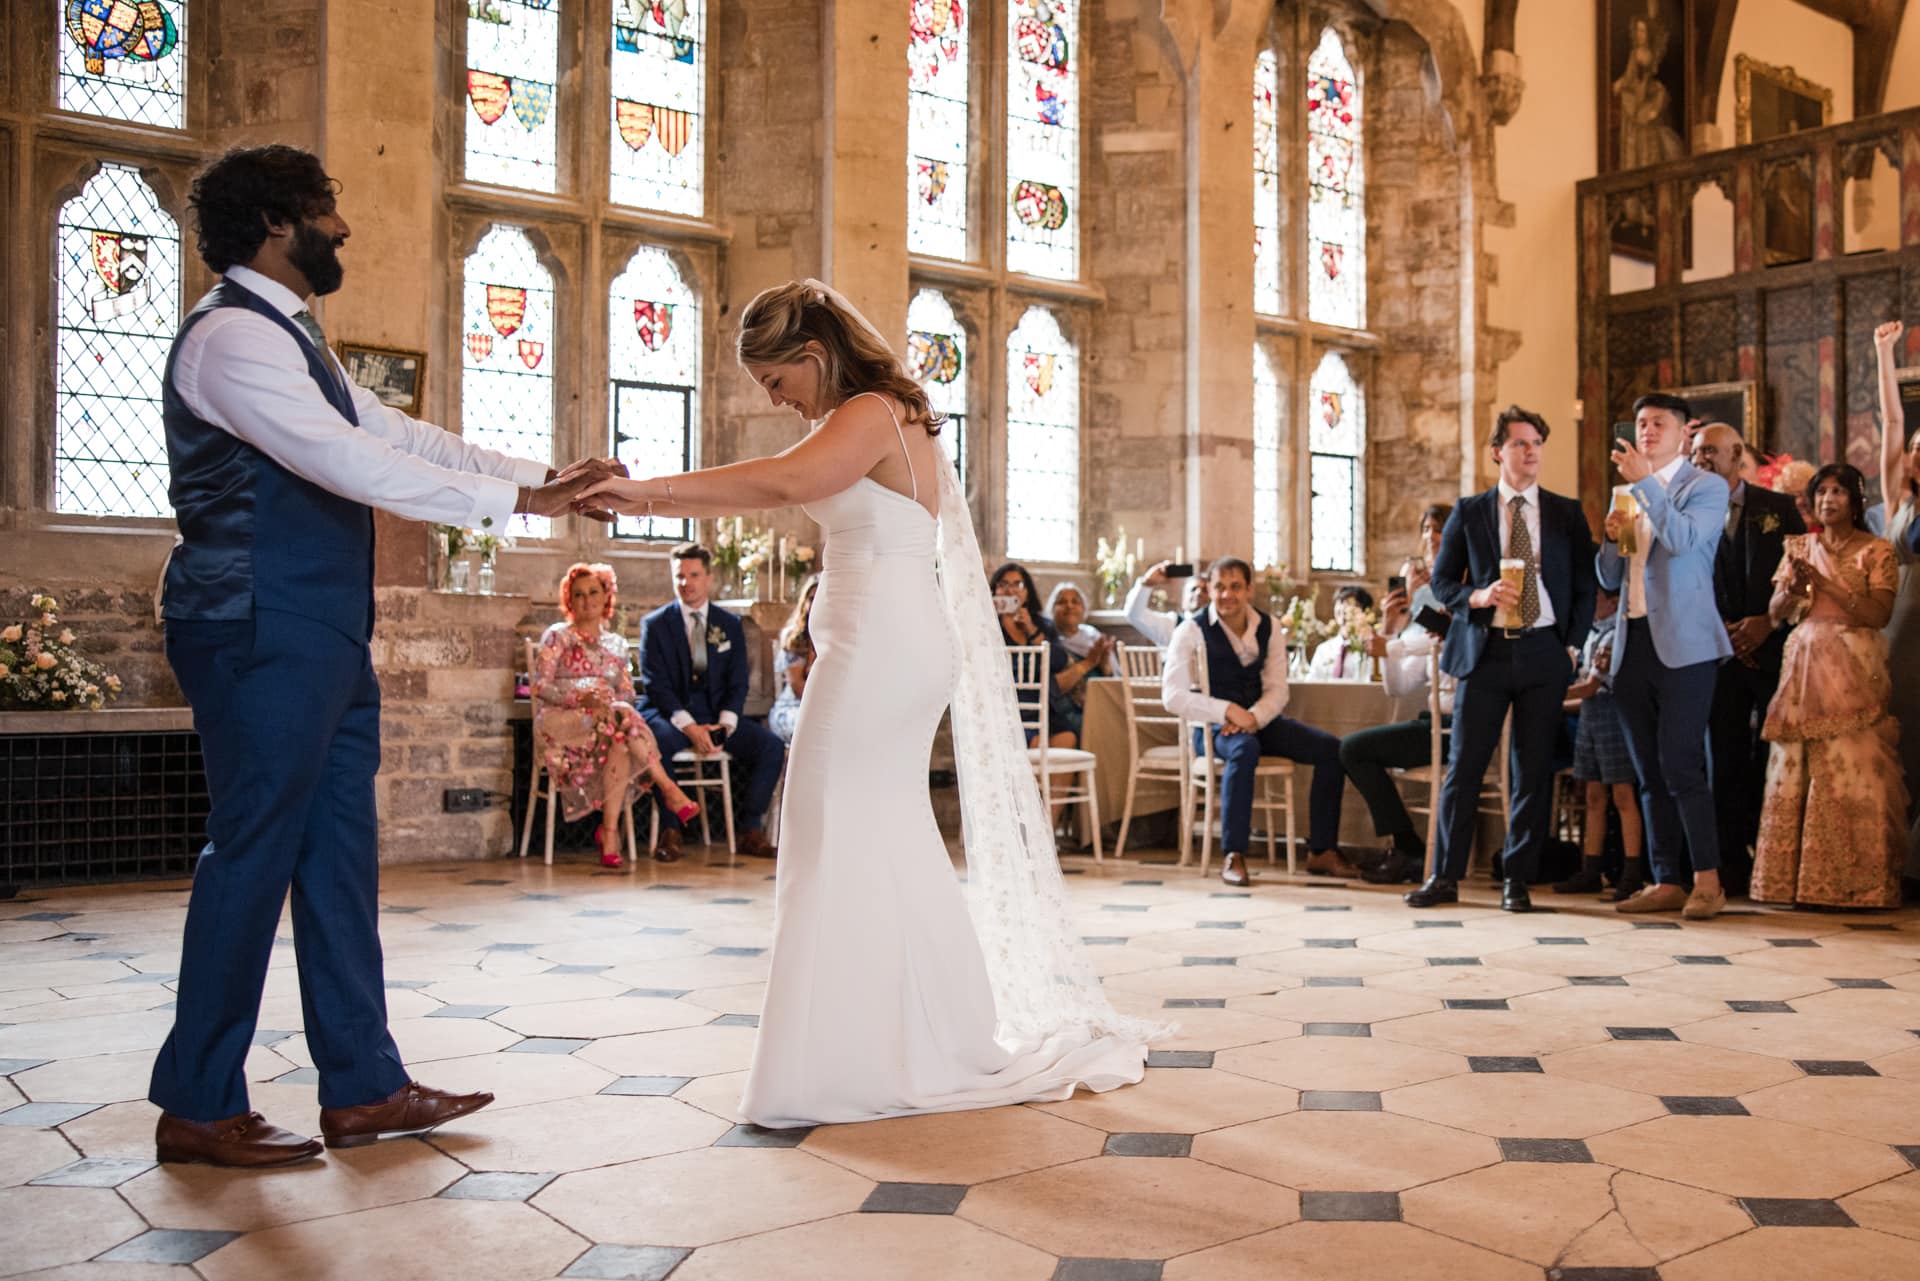 Bride and Groom first dance in big stately hall